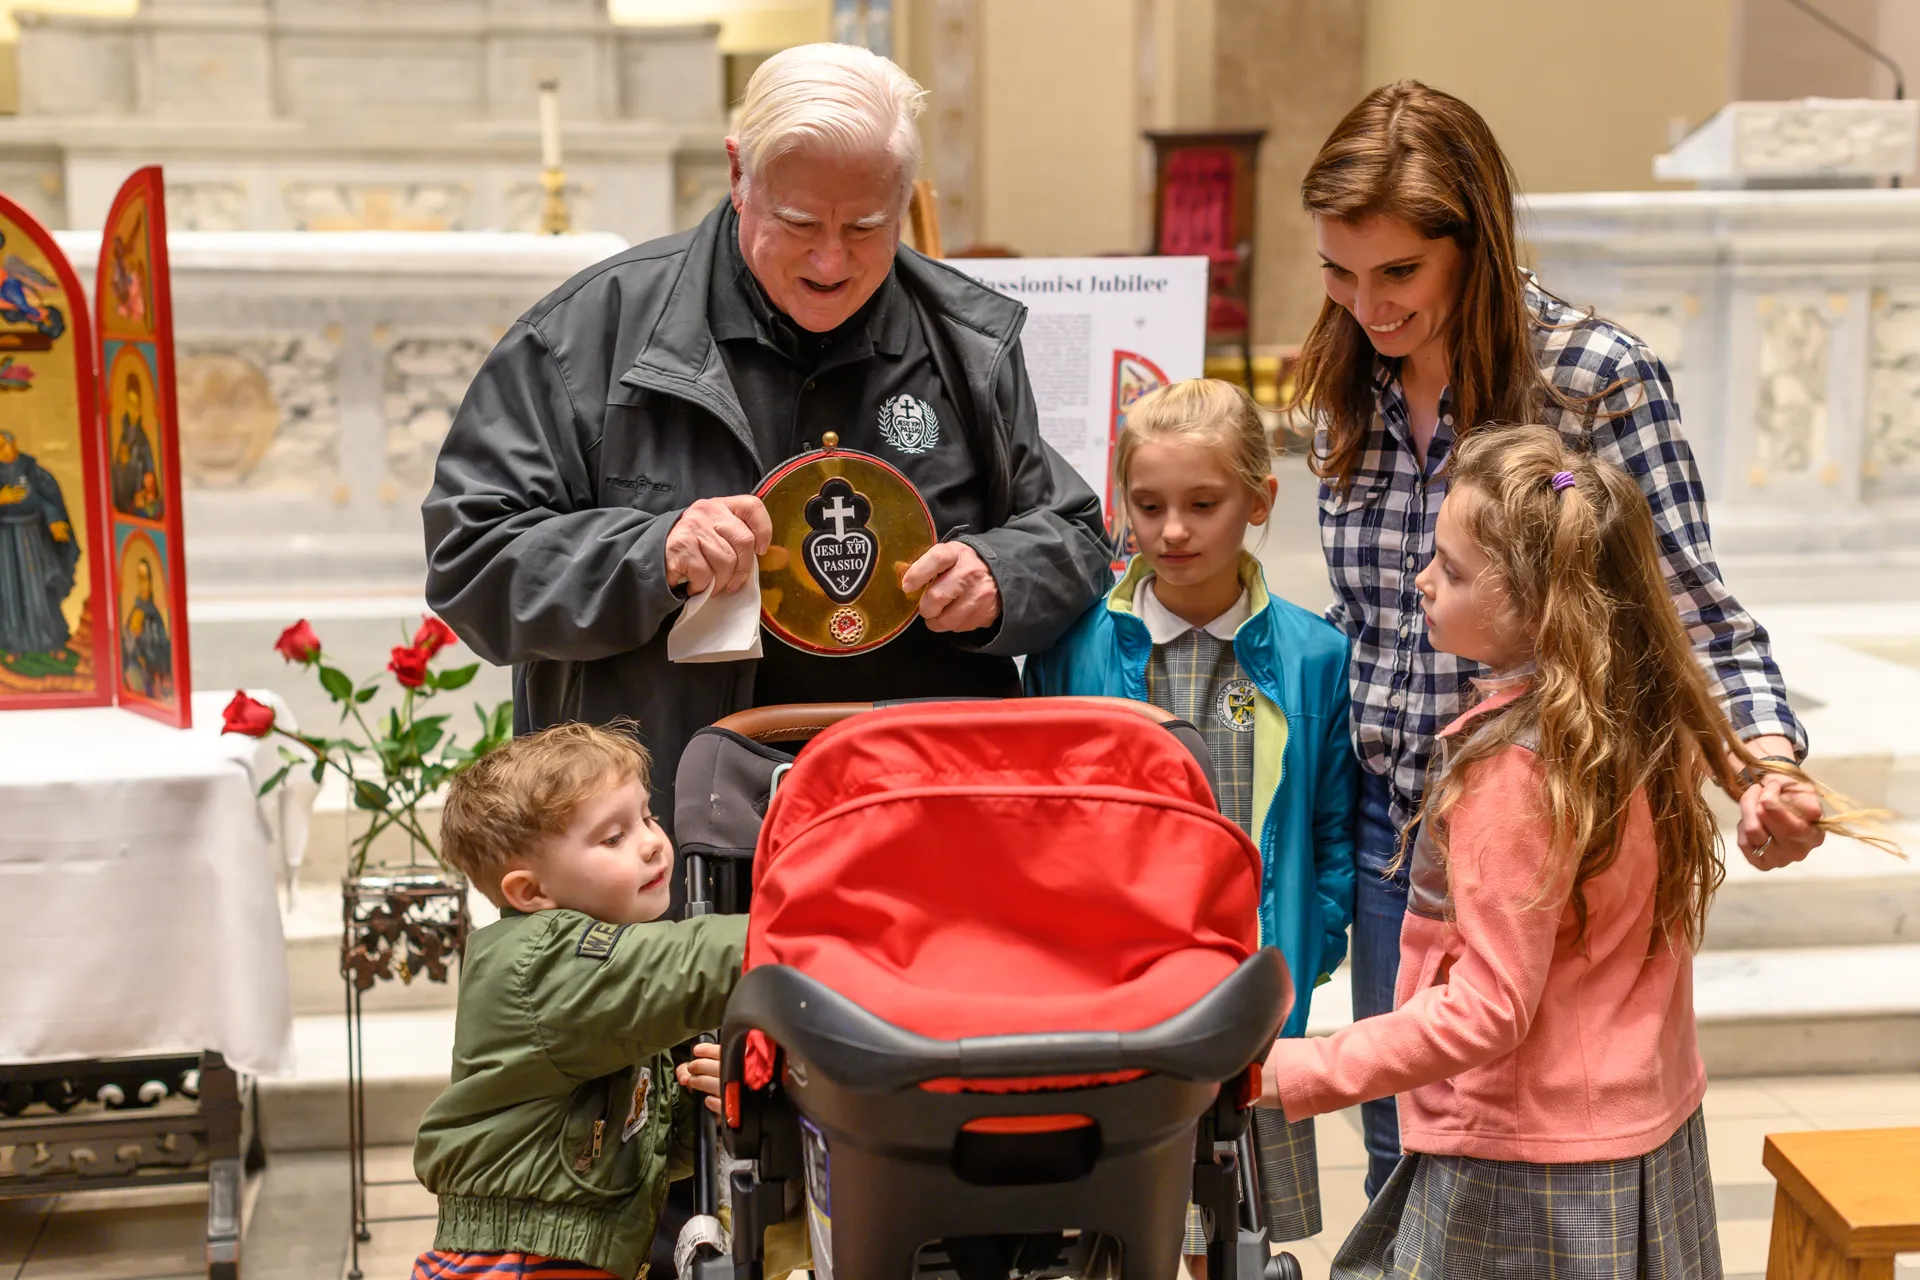 Passionist Icon Bob Weiss Blesses Family